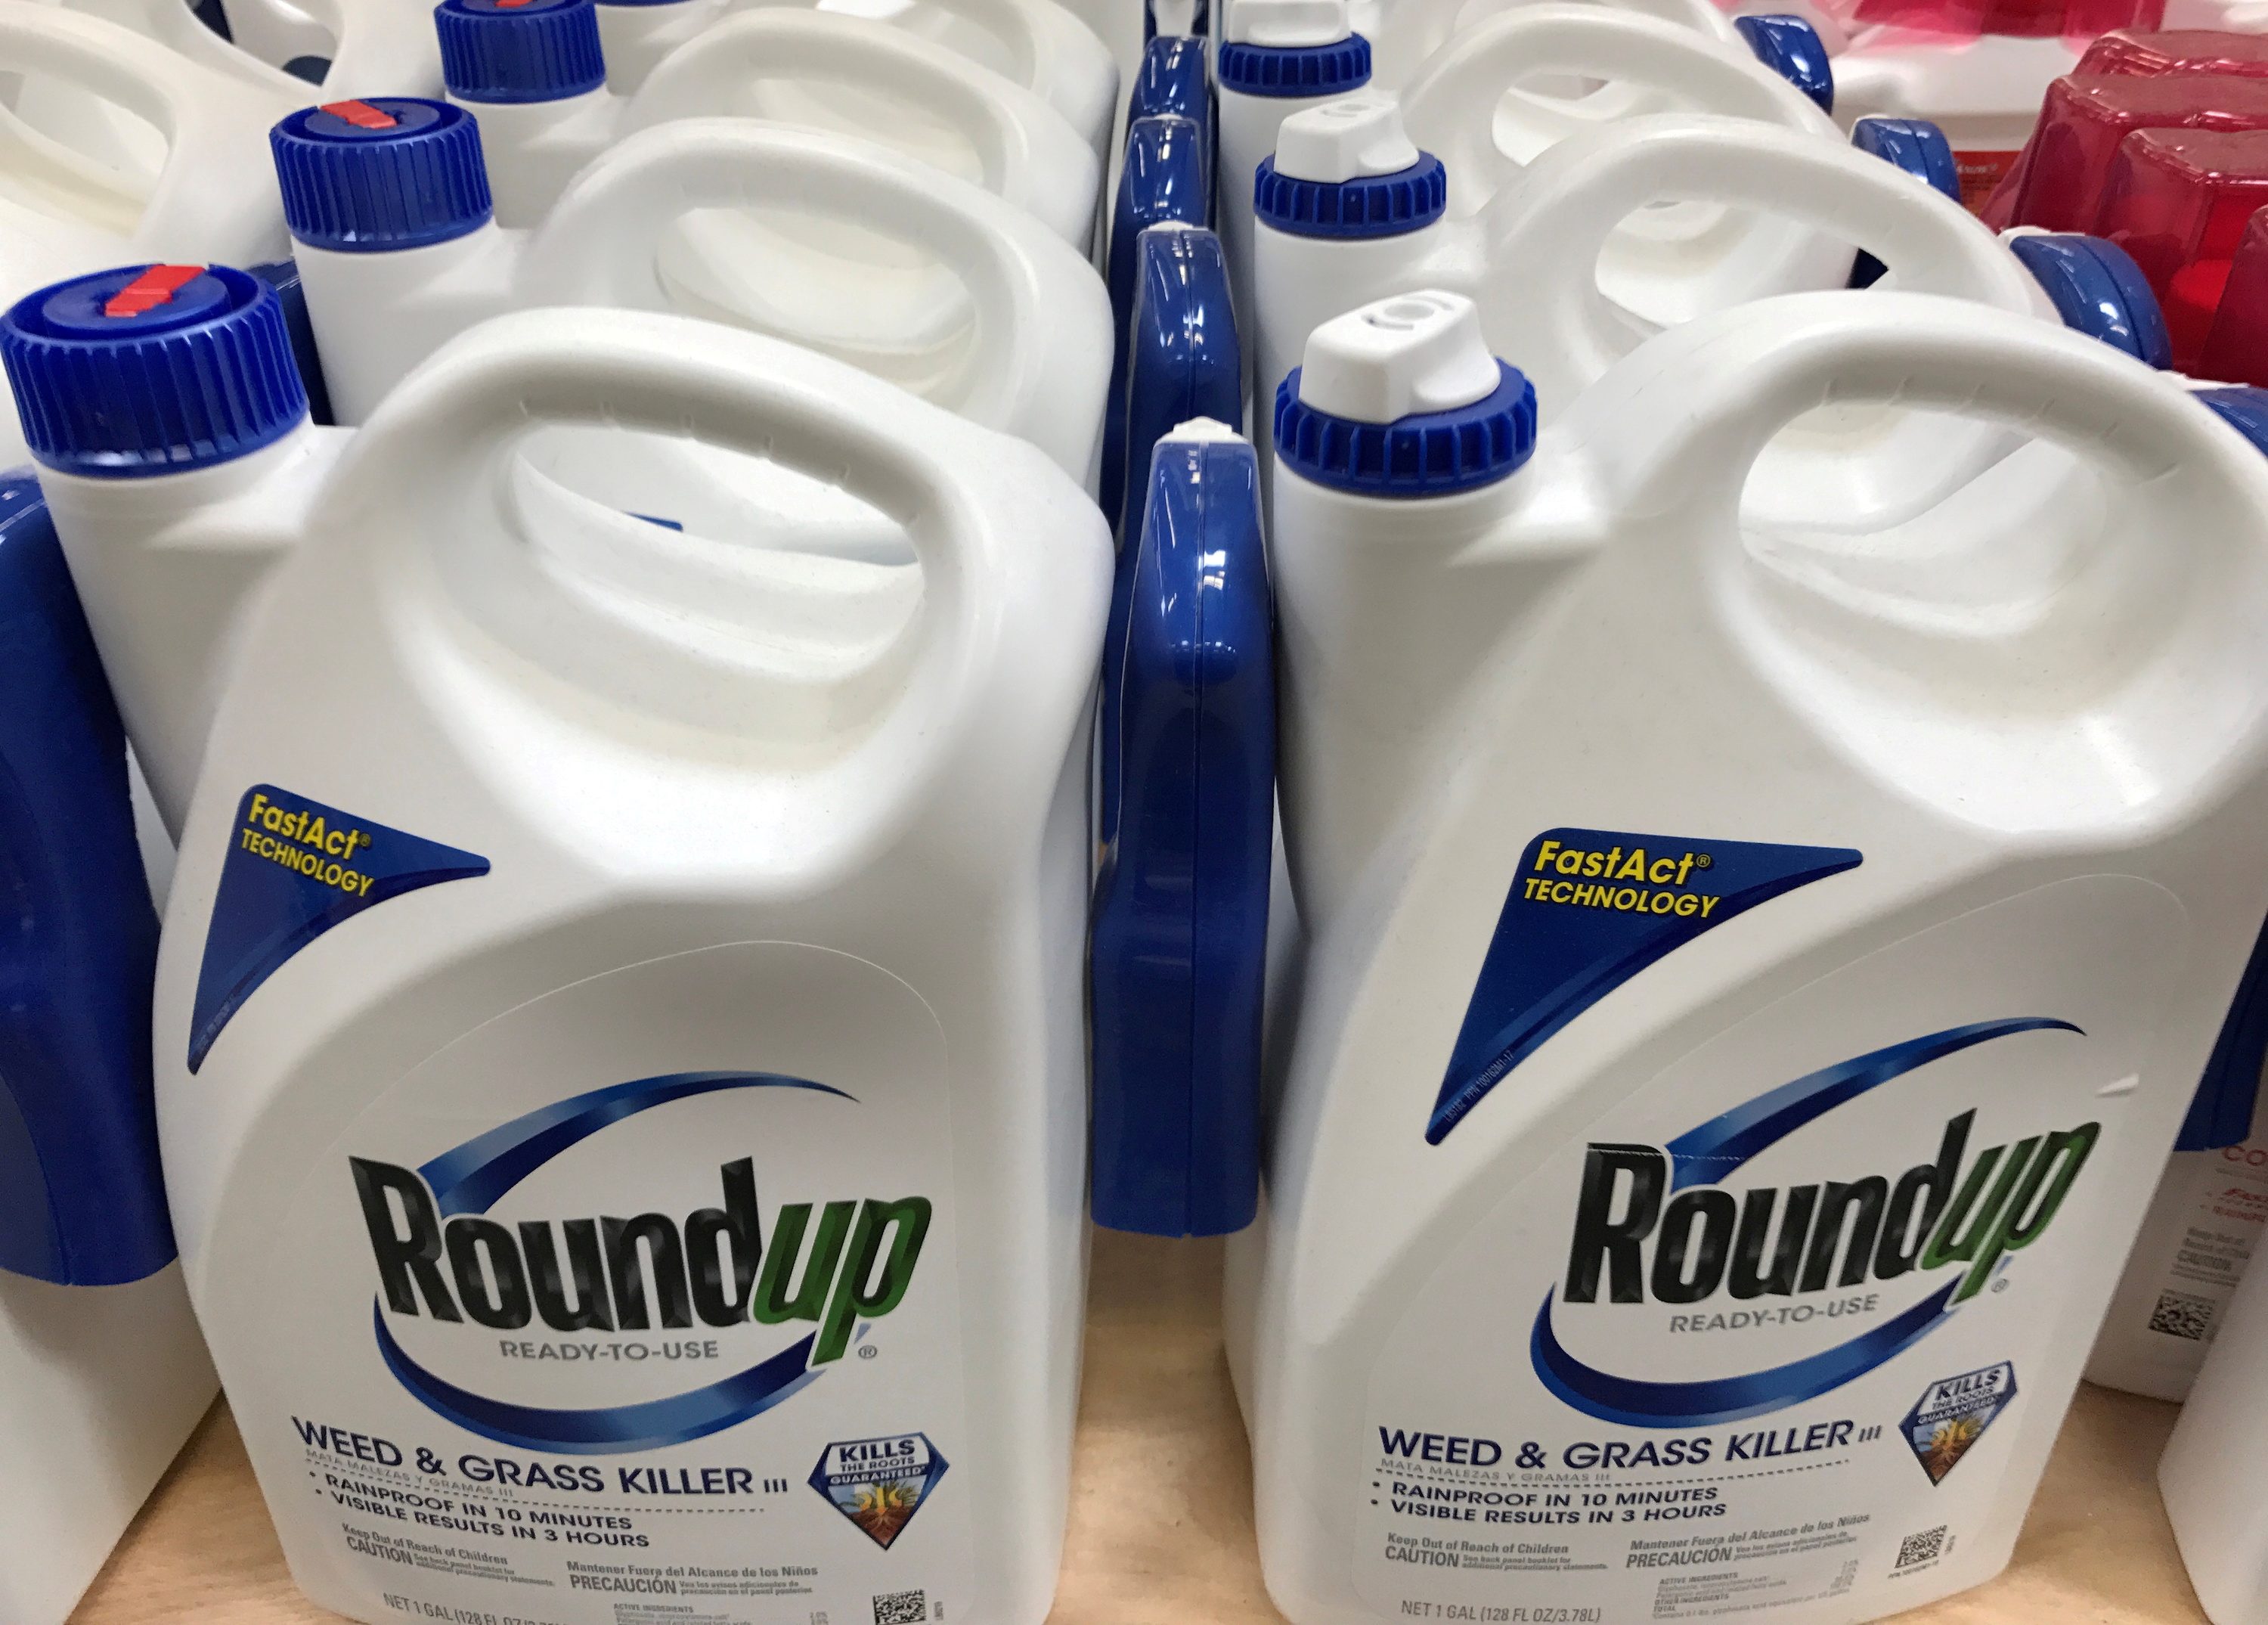 Judge suggests warning label to limit Roundup claims vs Bayer